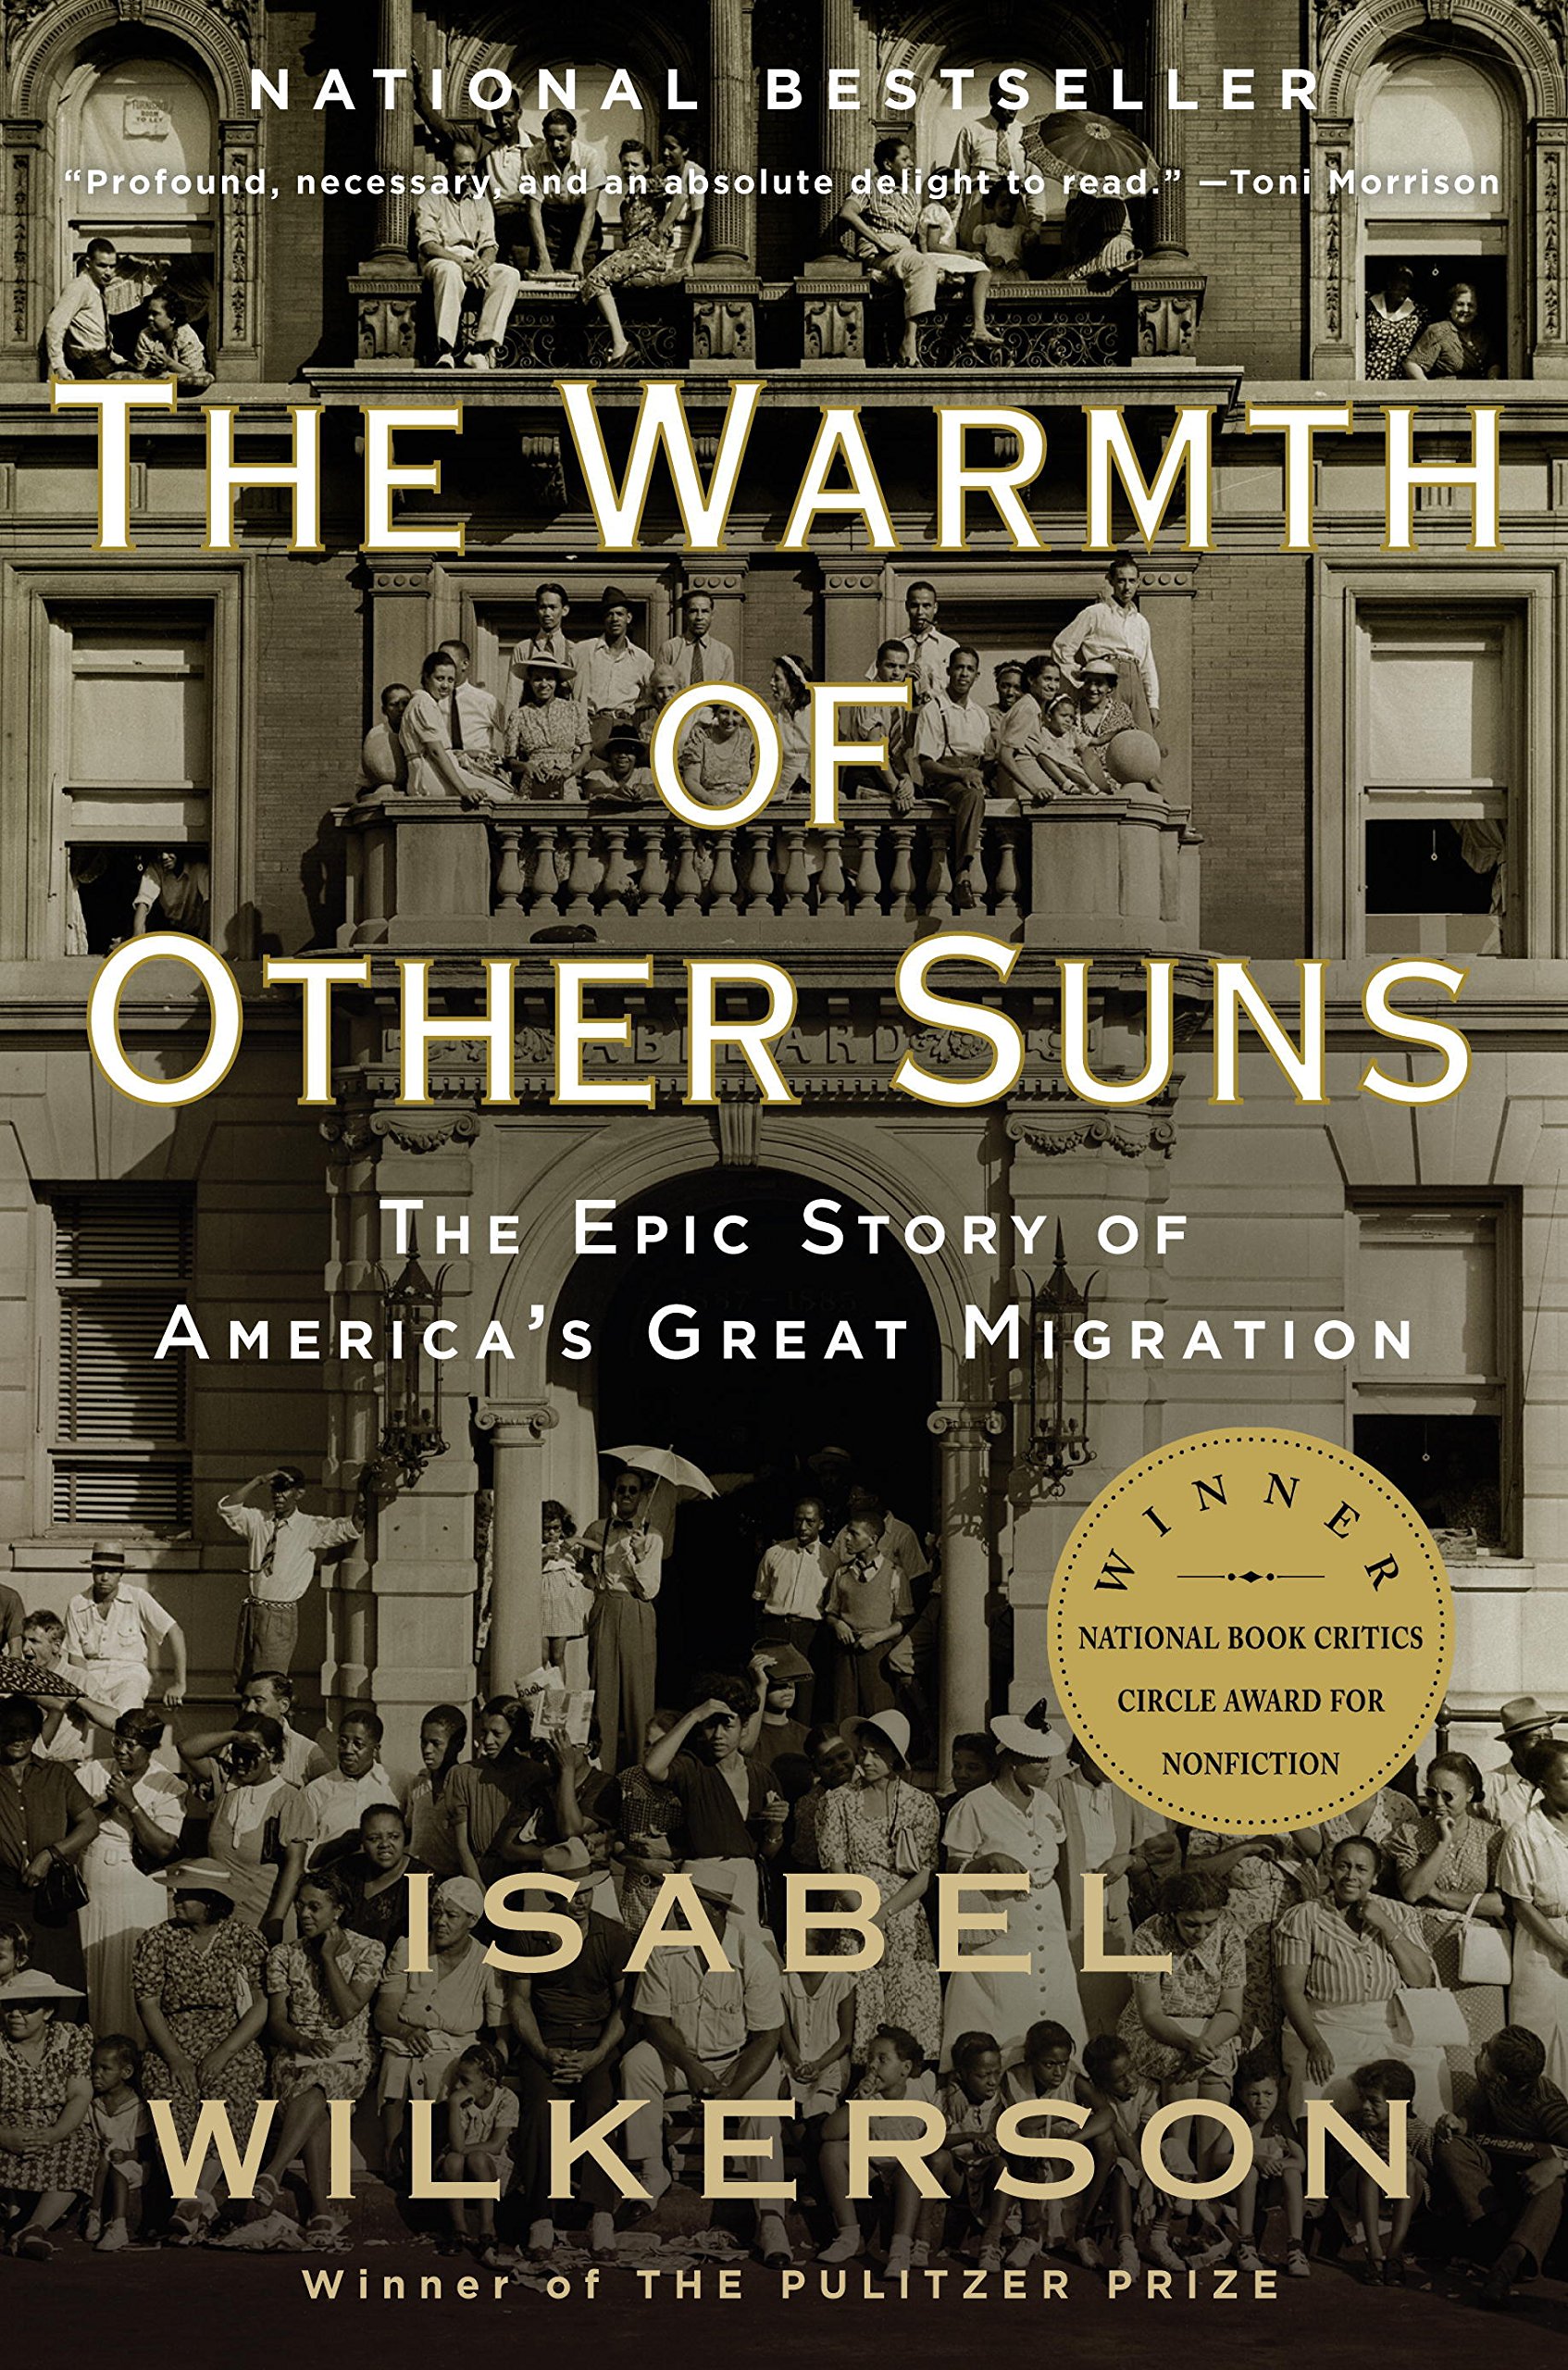 The Cover to Isabel Wilkerson's 'The Warm of Other Suns: The Epic Story of America's Great Migration" (2010), Penguin Random House